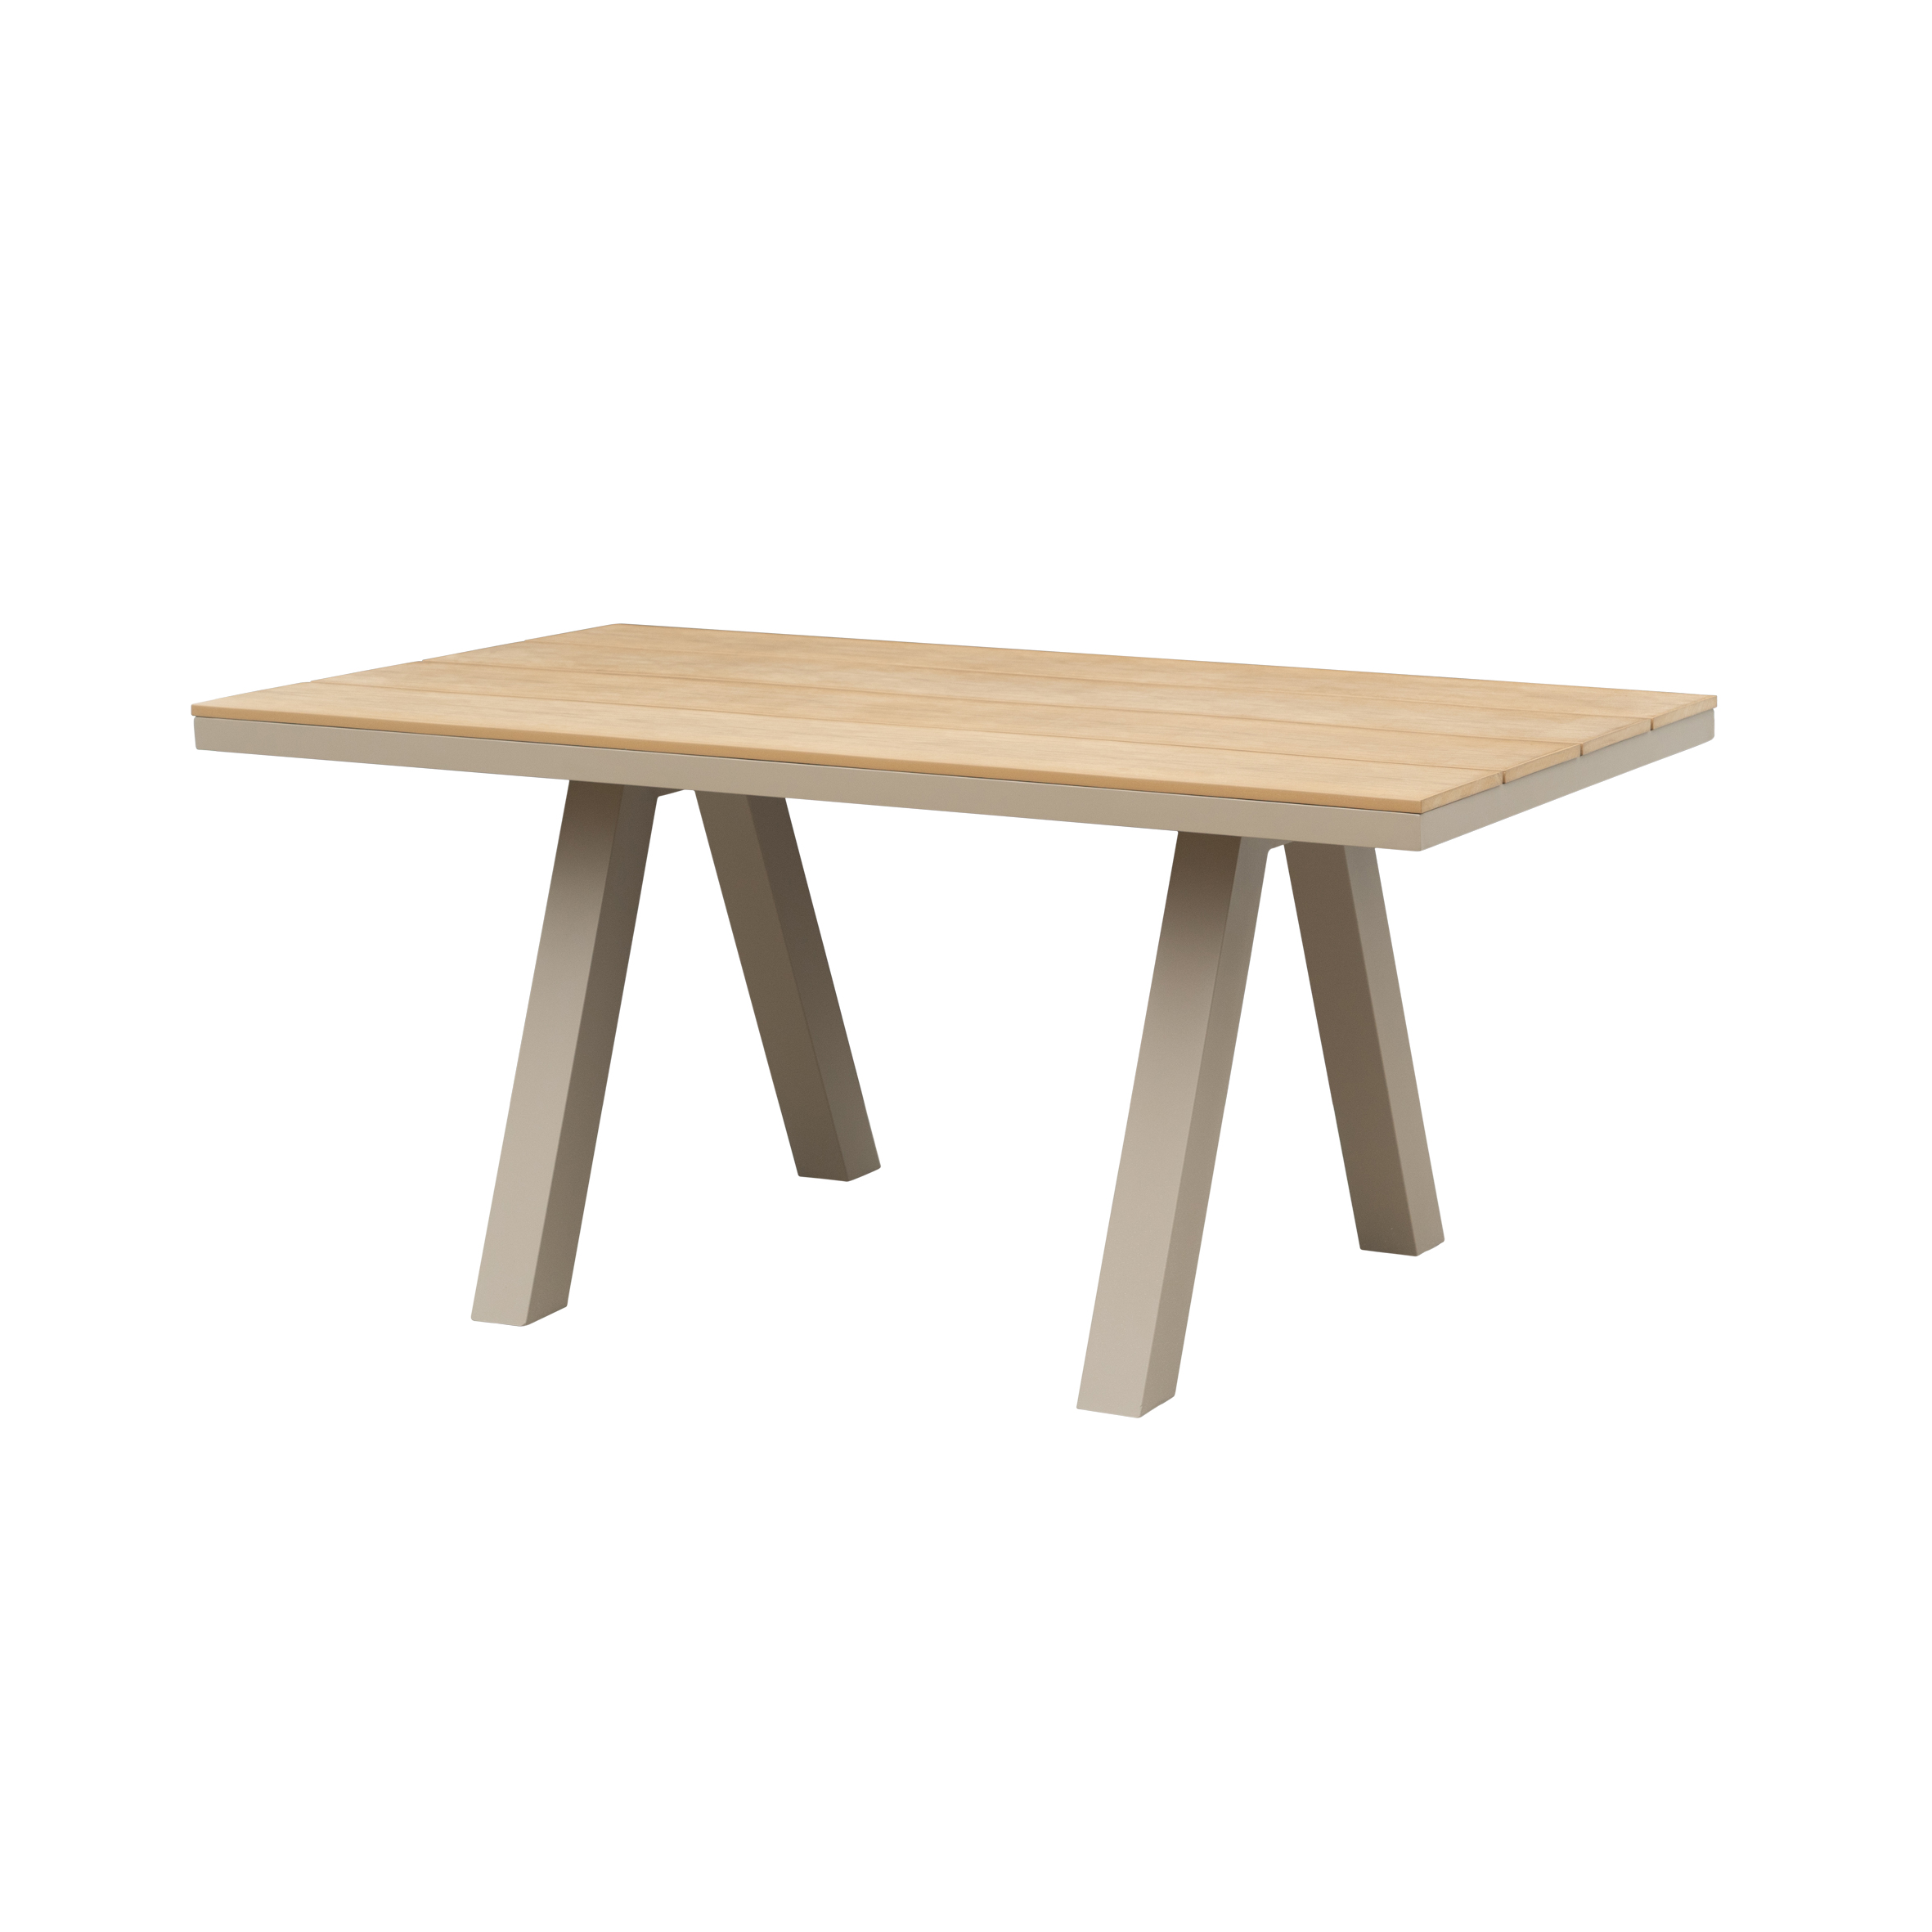 Emily rectangle dining table S1